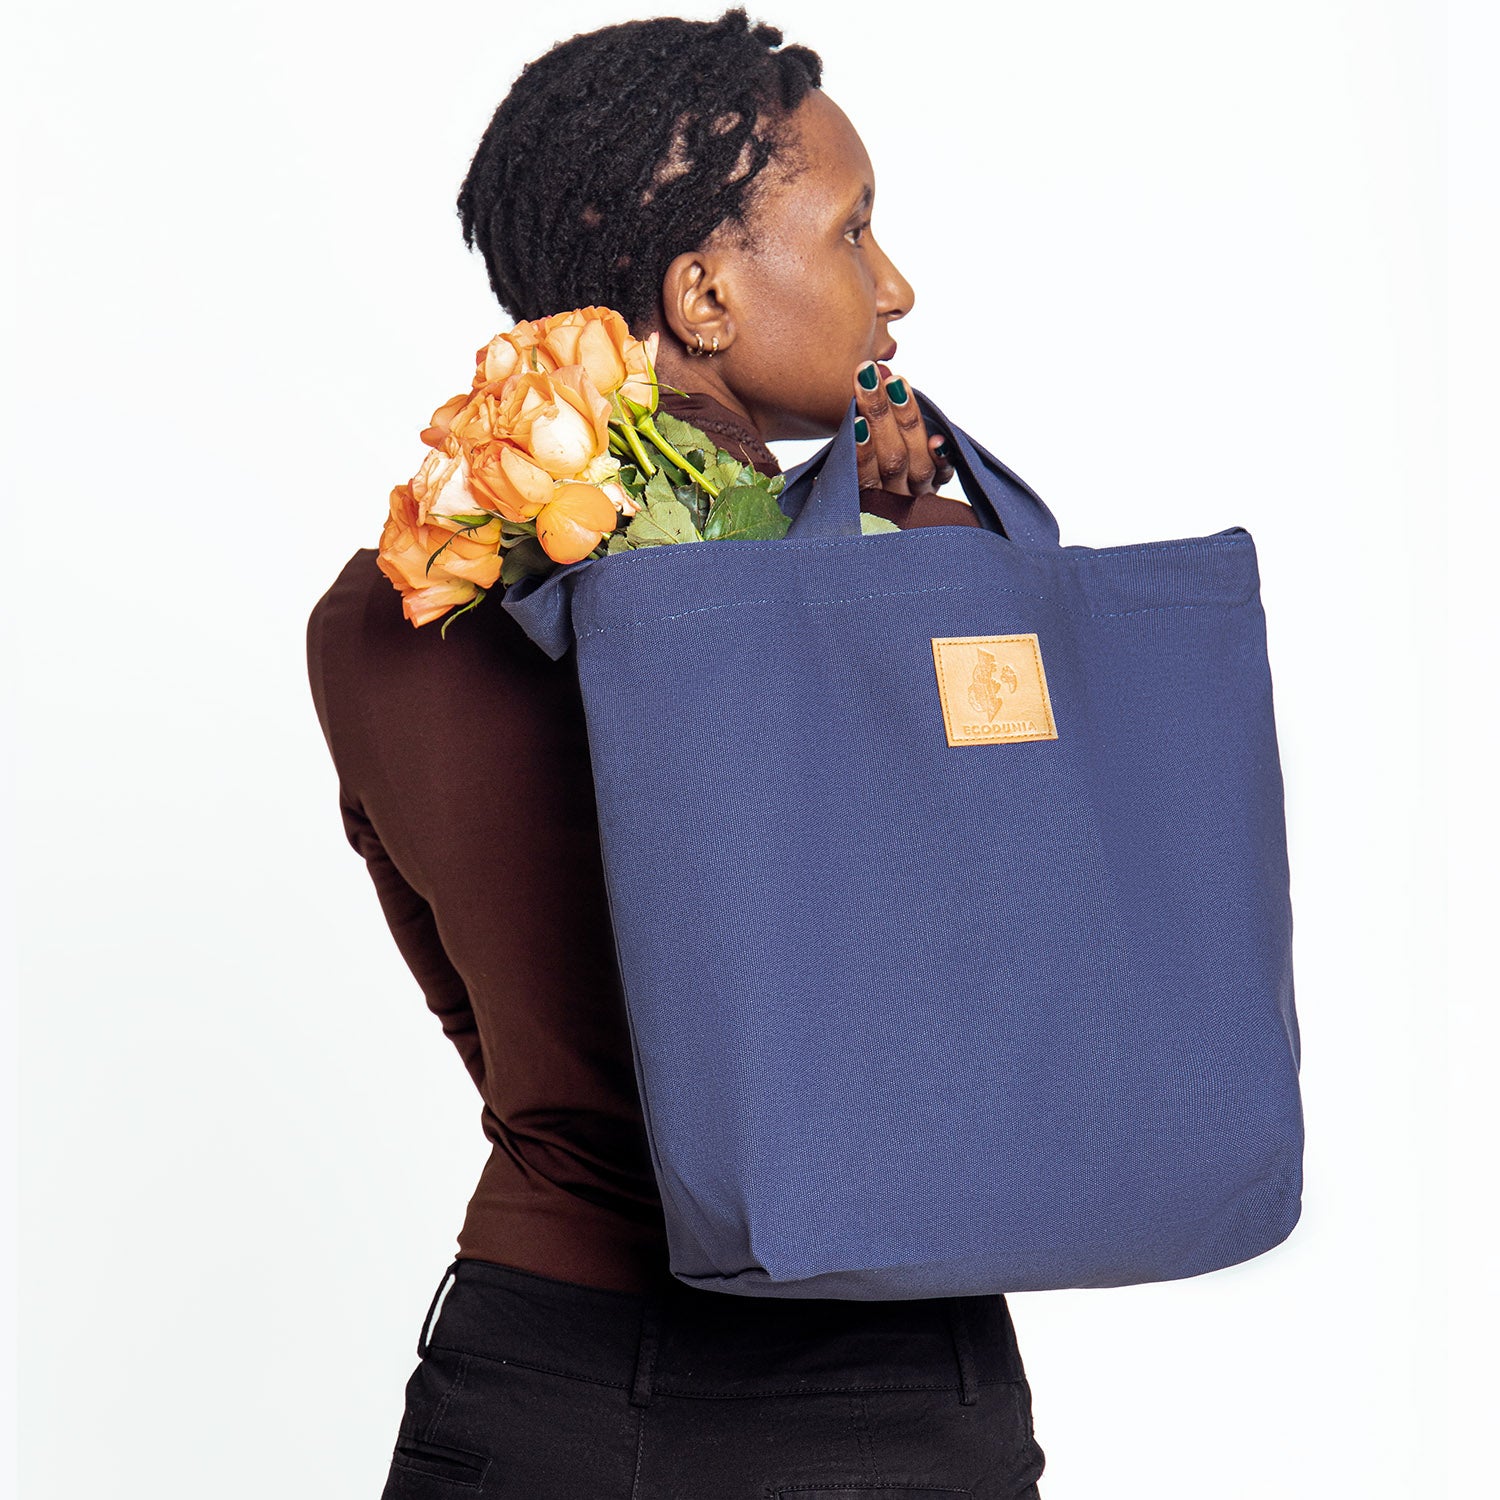 The Amani Carry All Bag - Blue